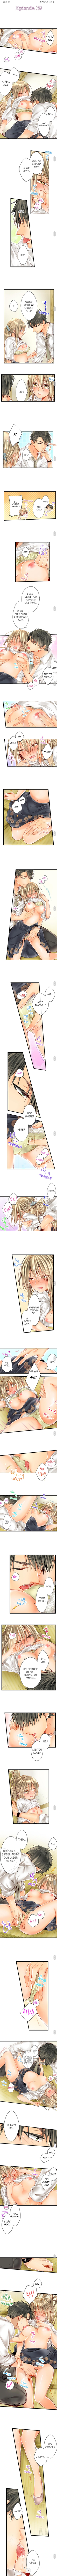 25-Year-Old High School Girl, I Wouldn’t Do This with a Kid Ch.39